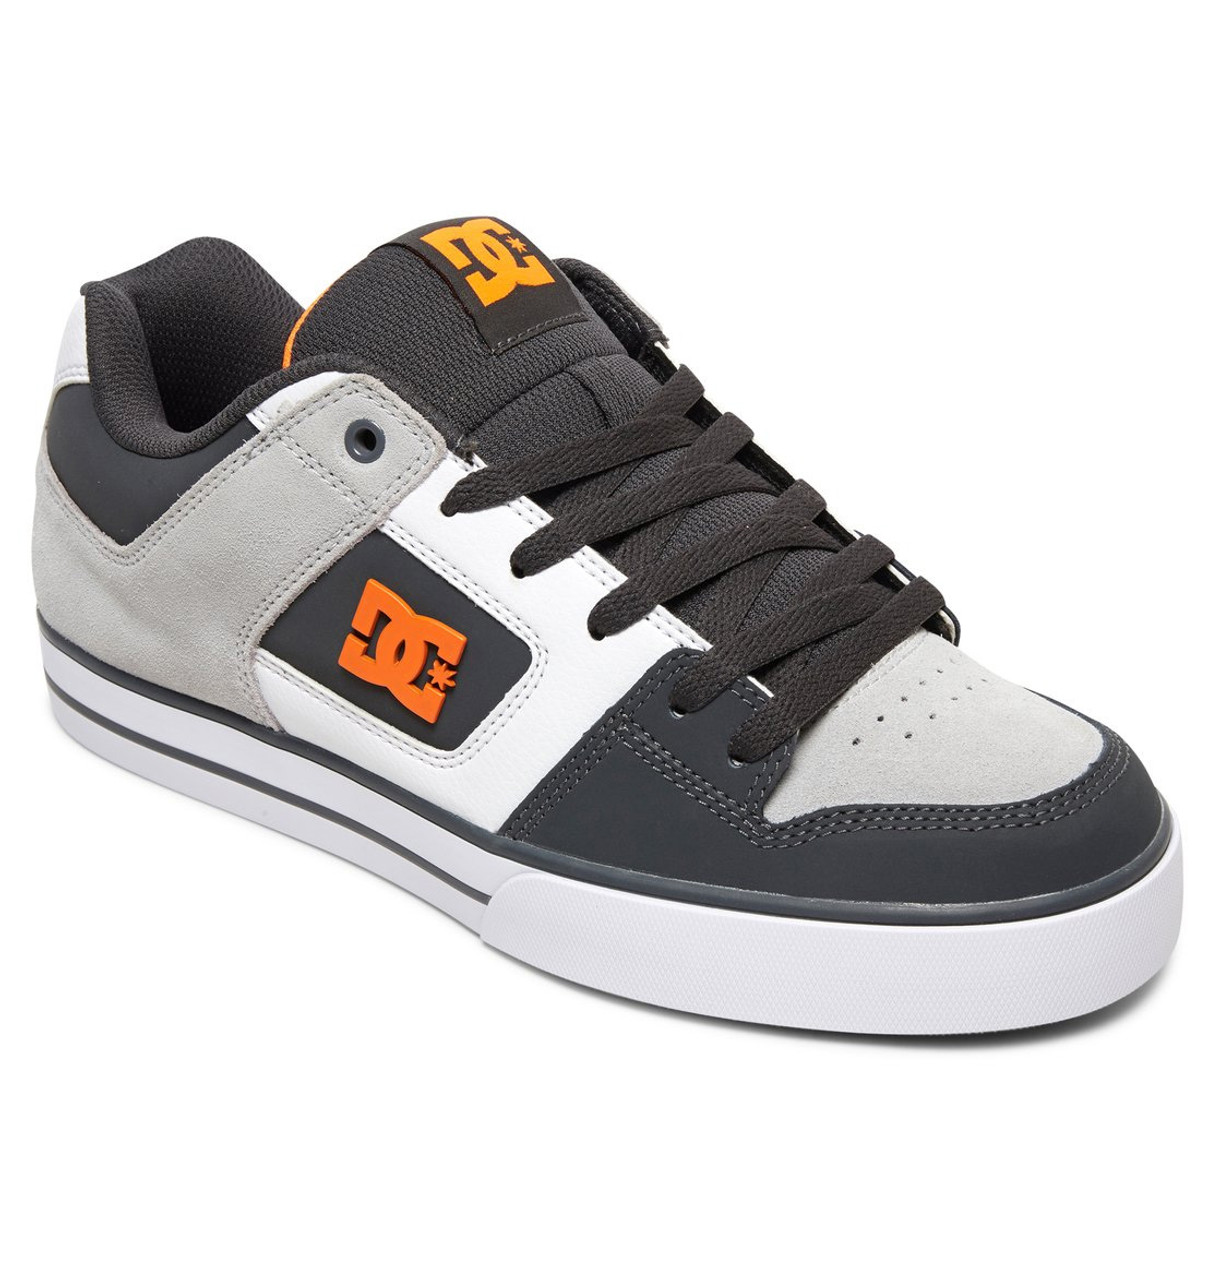 old dc skate shoes